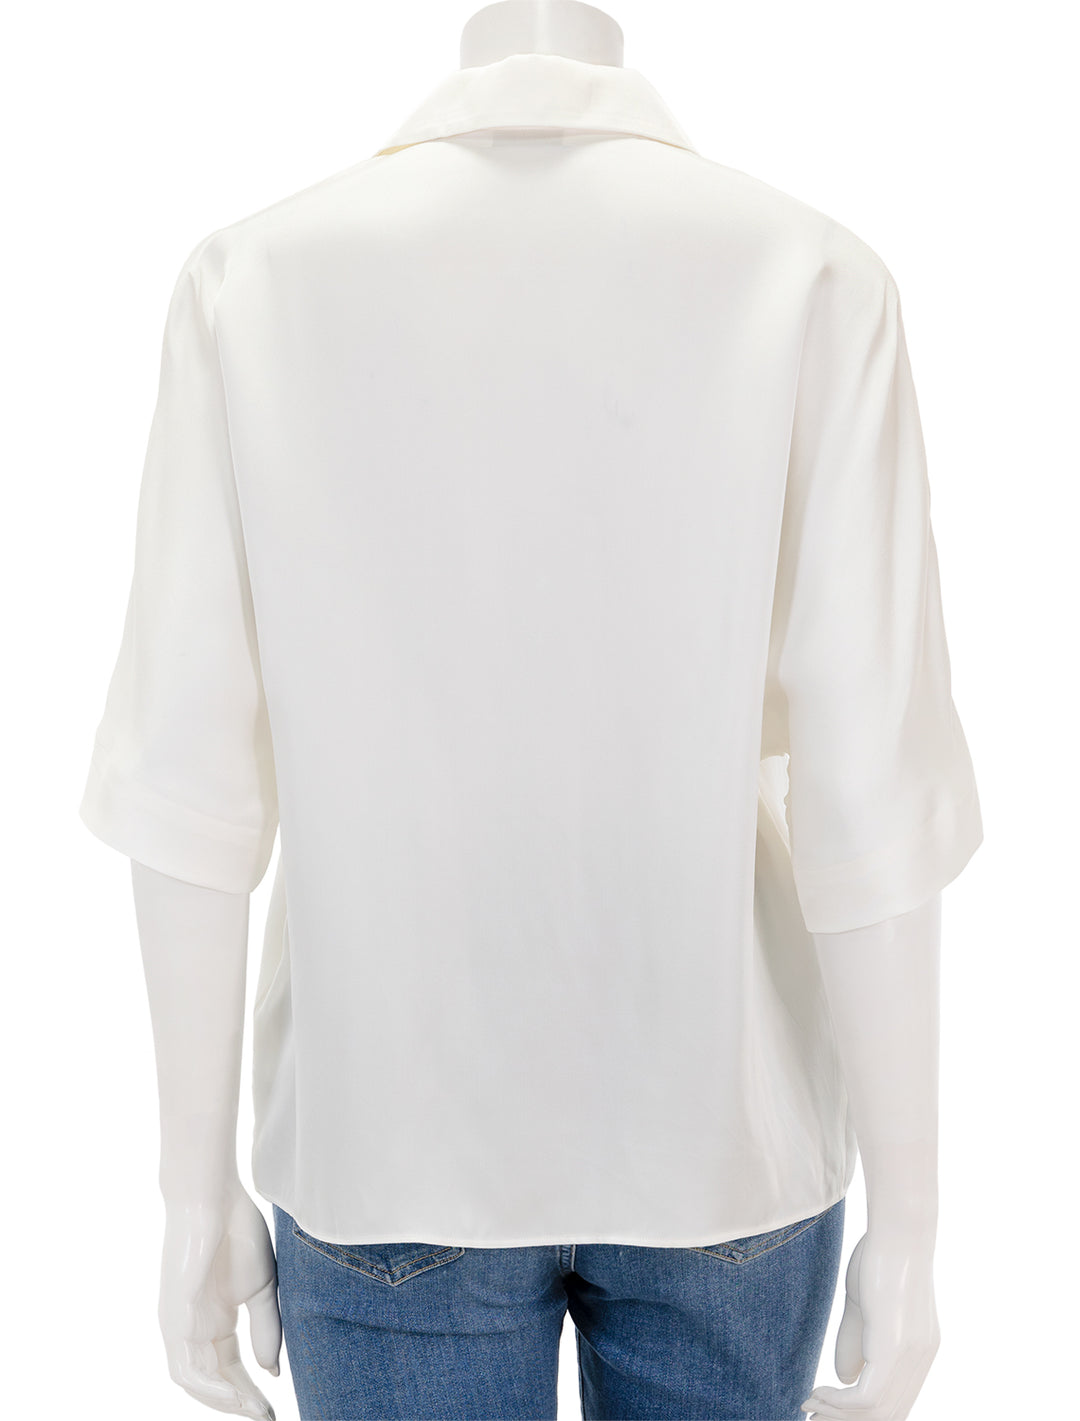 Back view of Anine Bing's julia blouse in ivory.